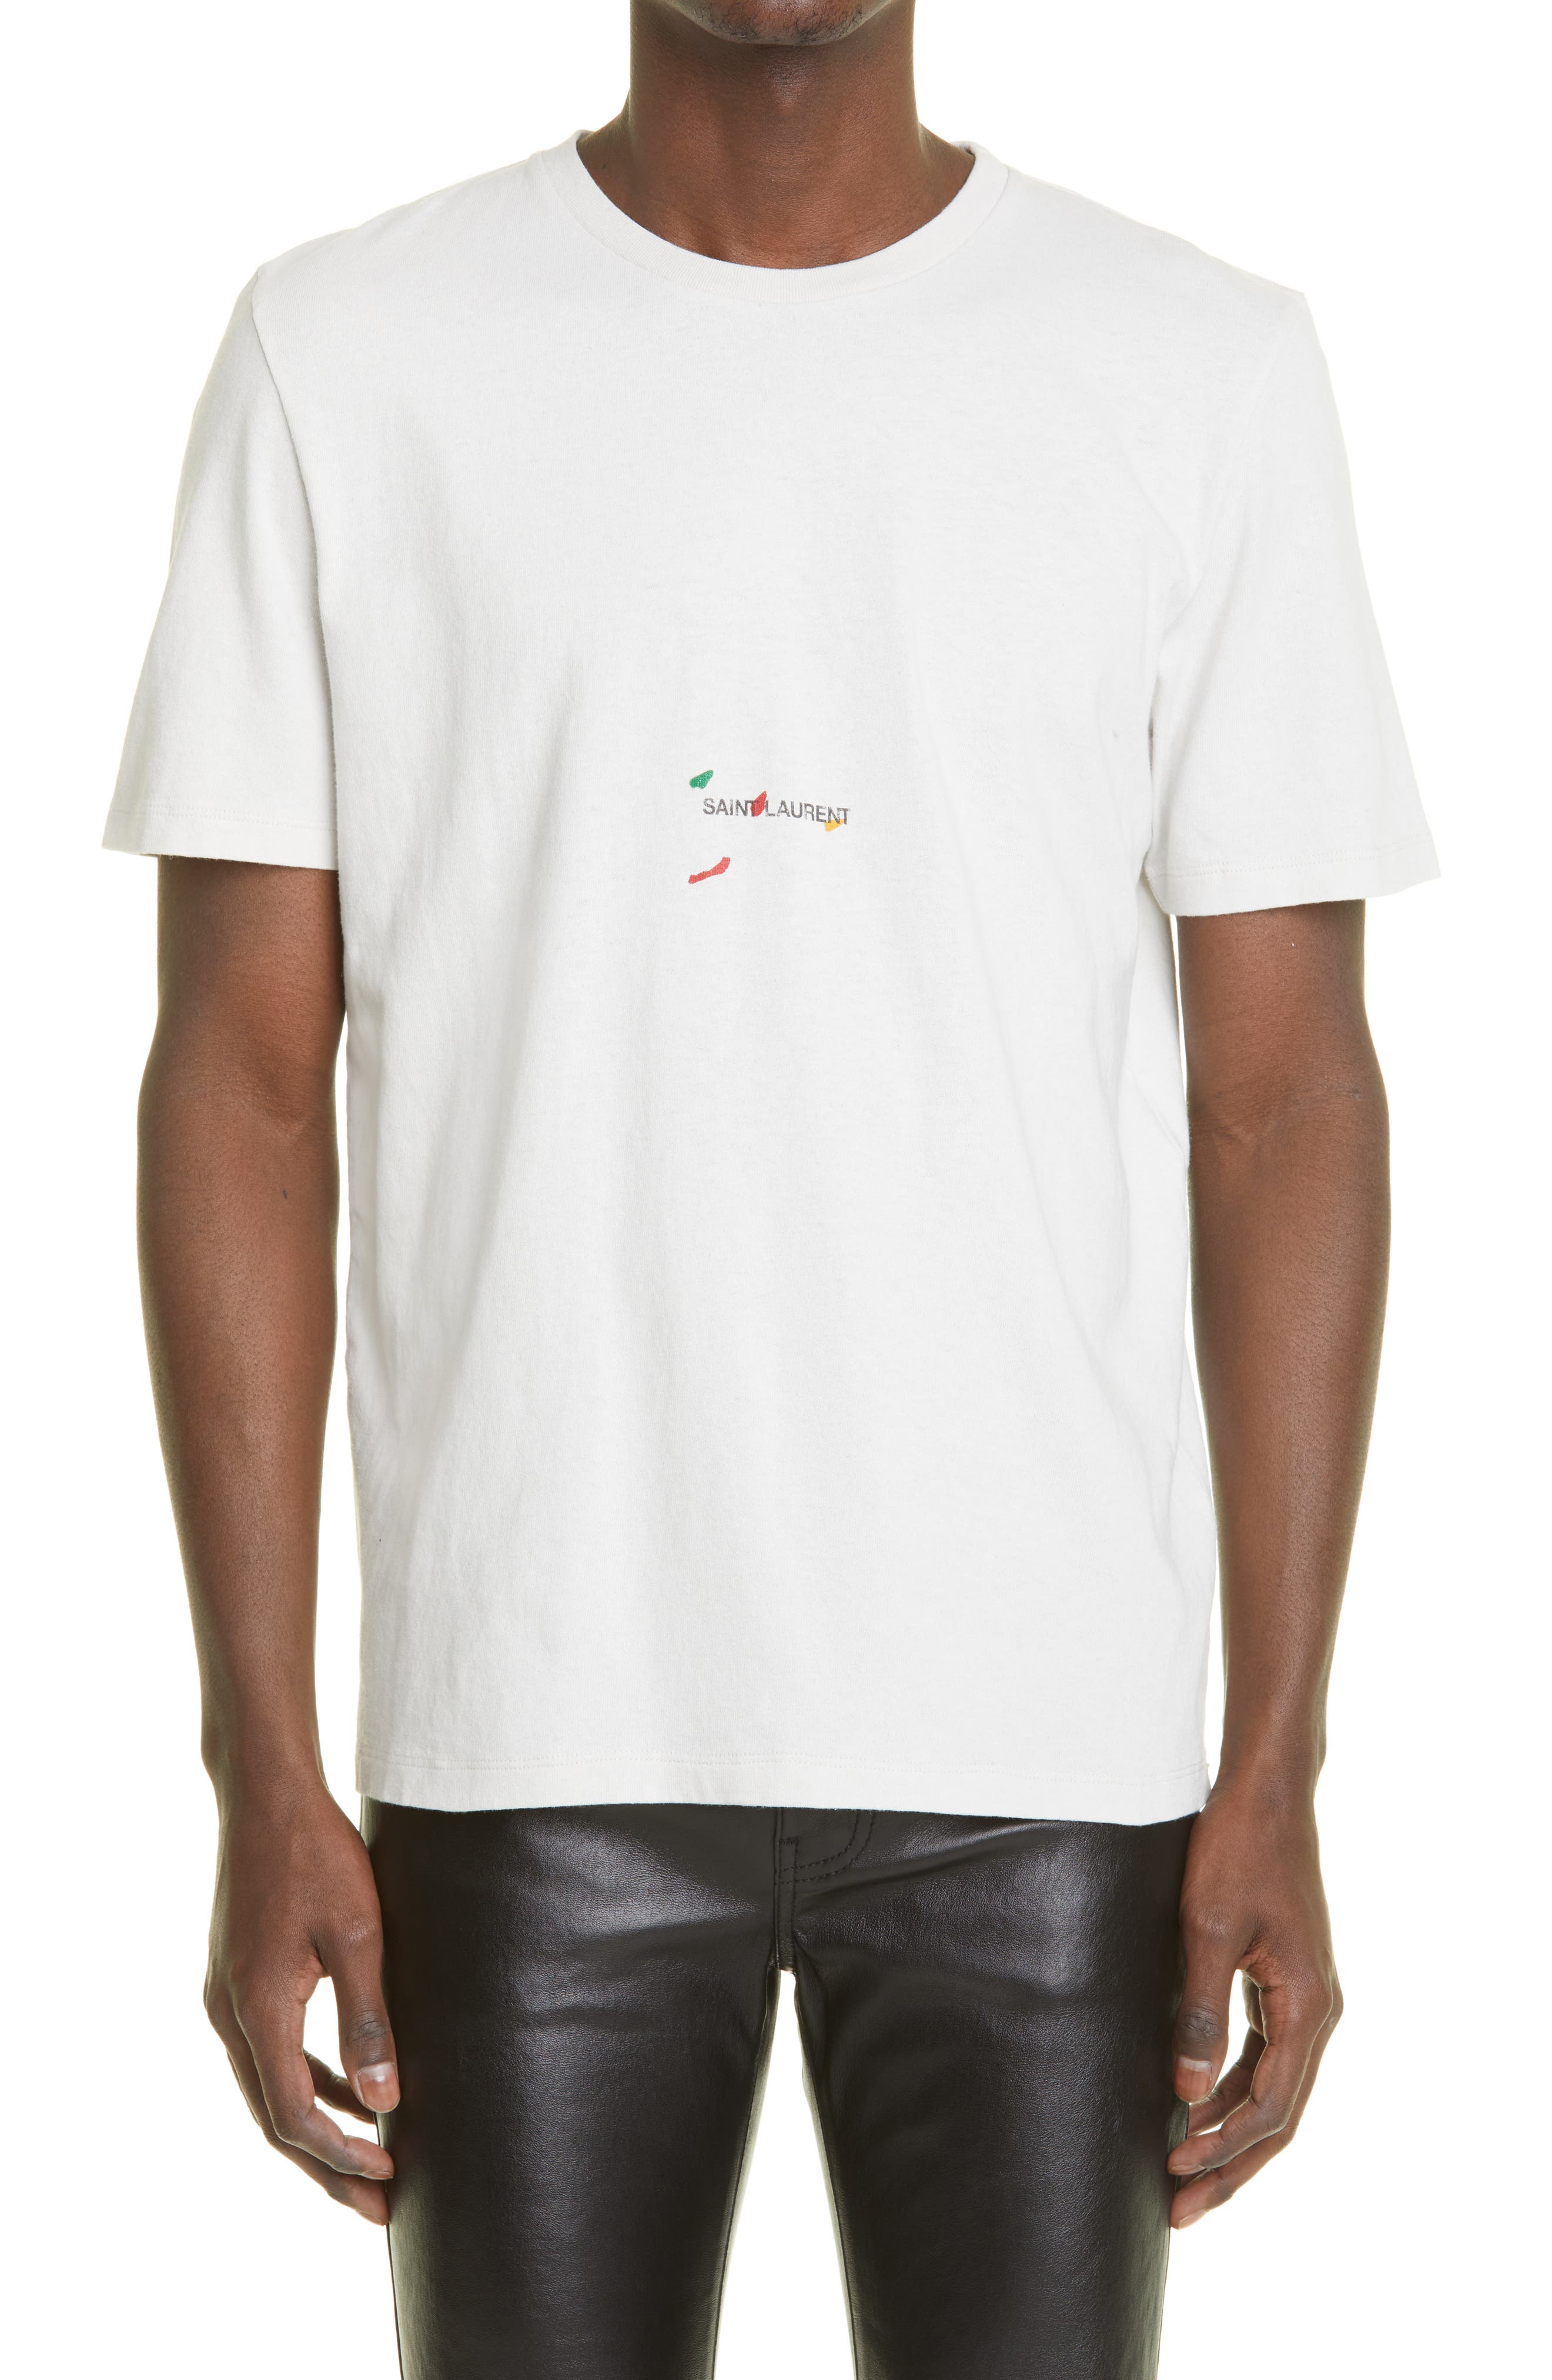 Saint Laurent Rive Gauche Organic Cotton Graphic Tee in Pearl Multi at Nordstrom, Size Small